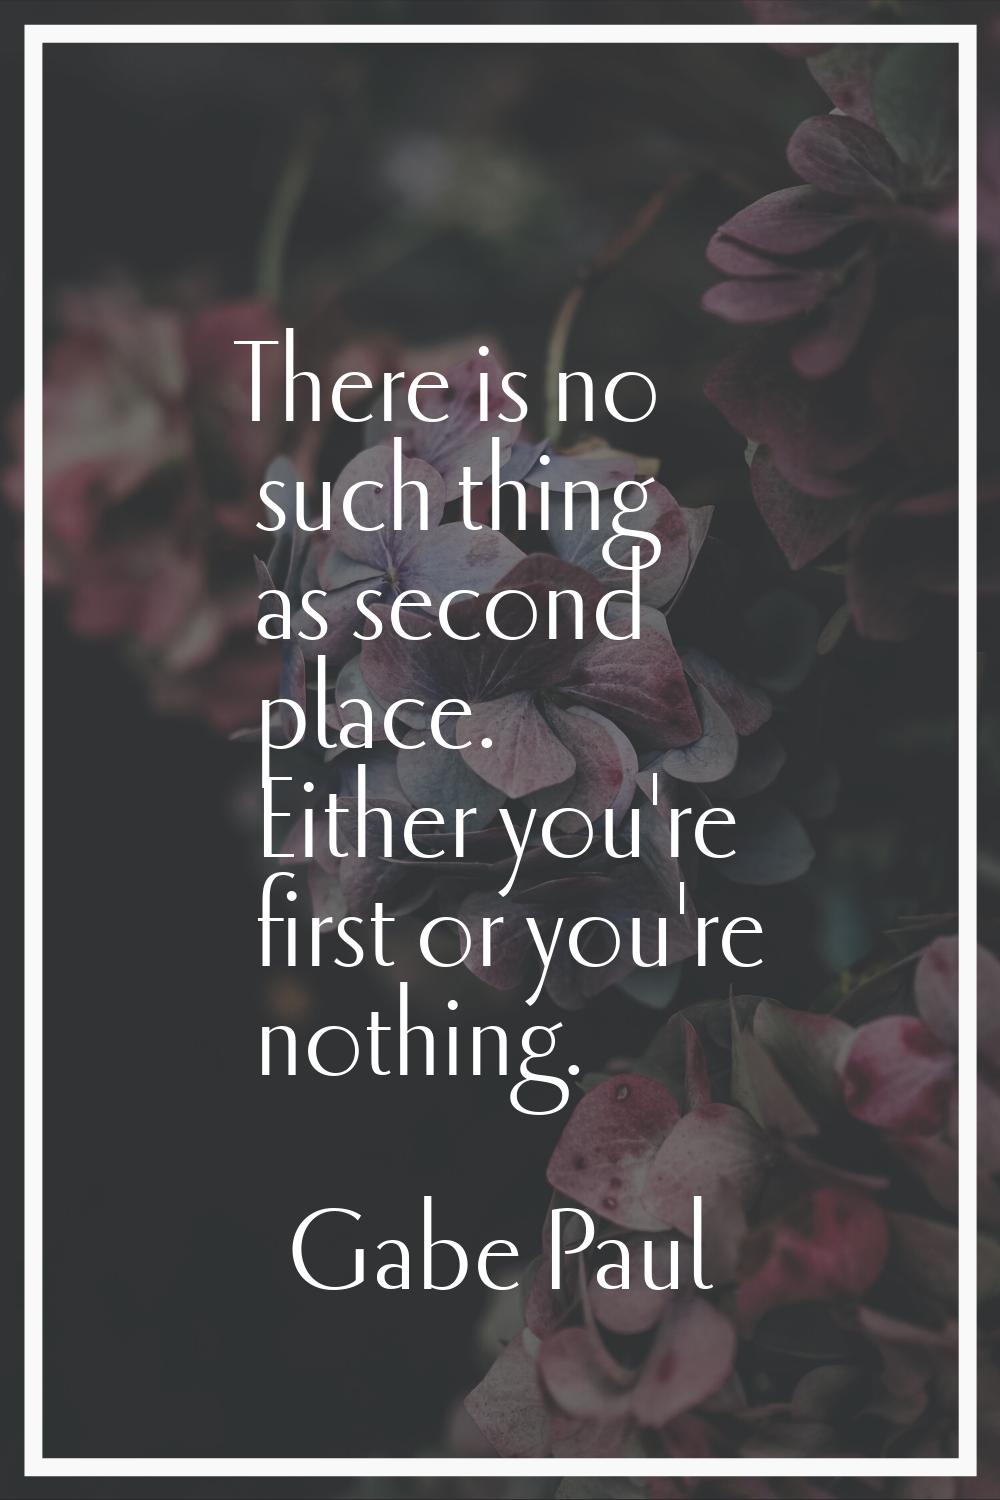 There is no such thing as second place. Either you're first or you're nothing.